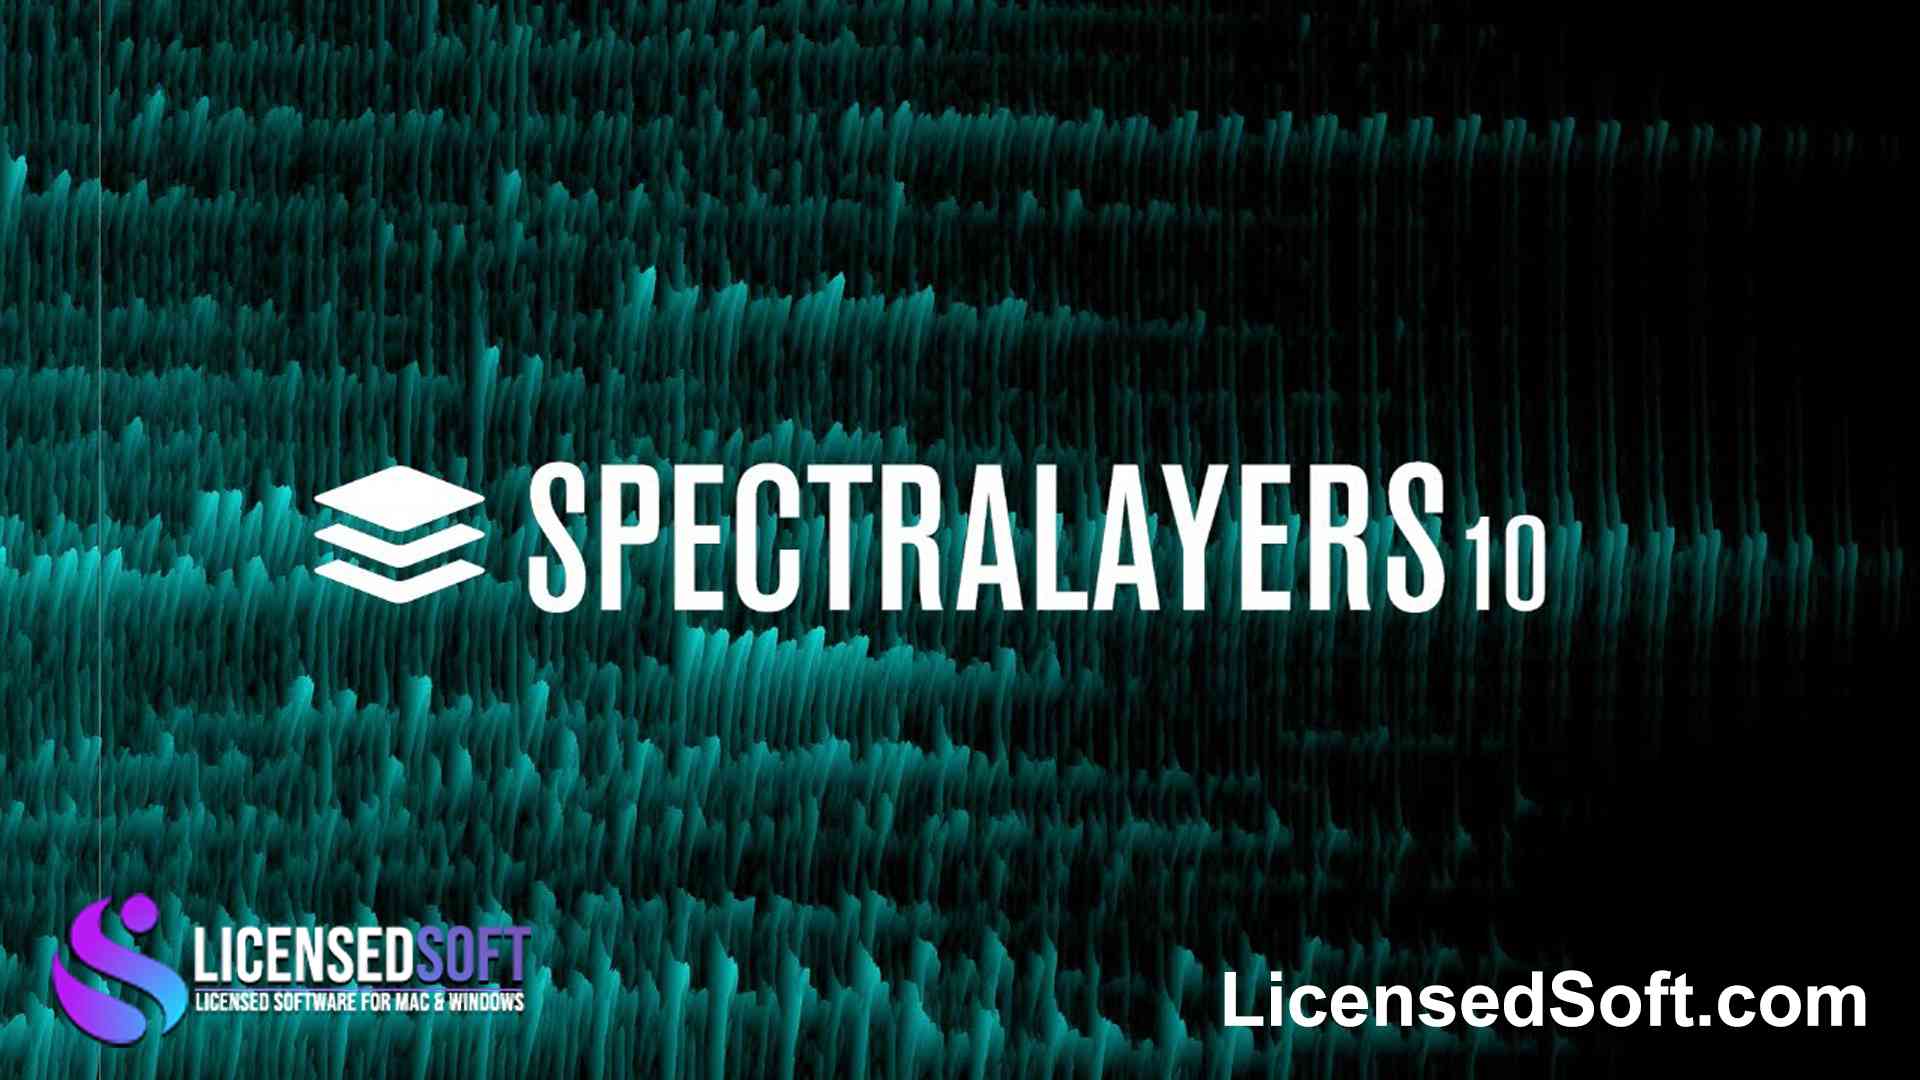 Steinberg SpectraLayers Pro 10 Perpetual License By LicensedSoft